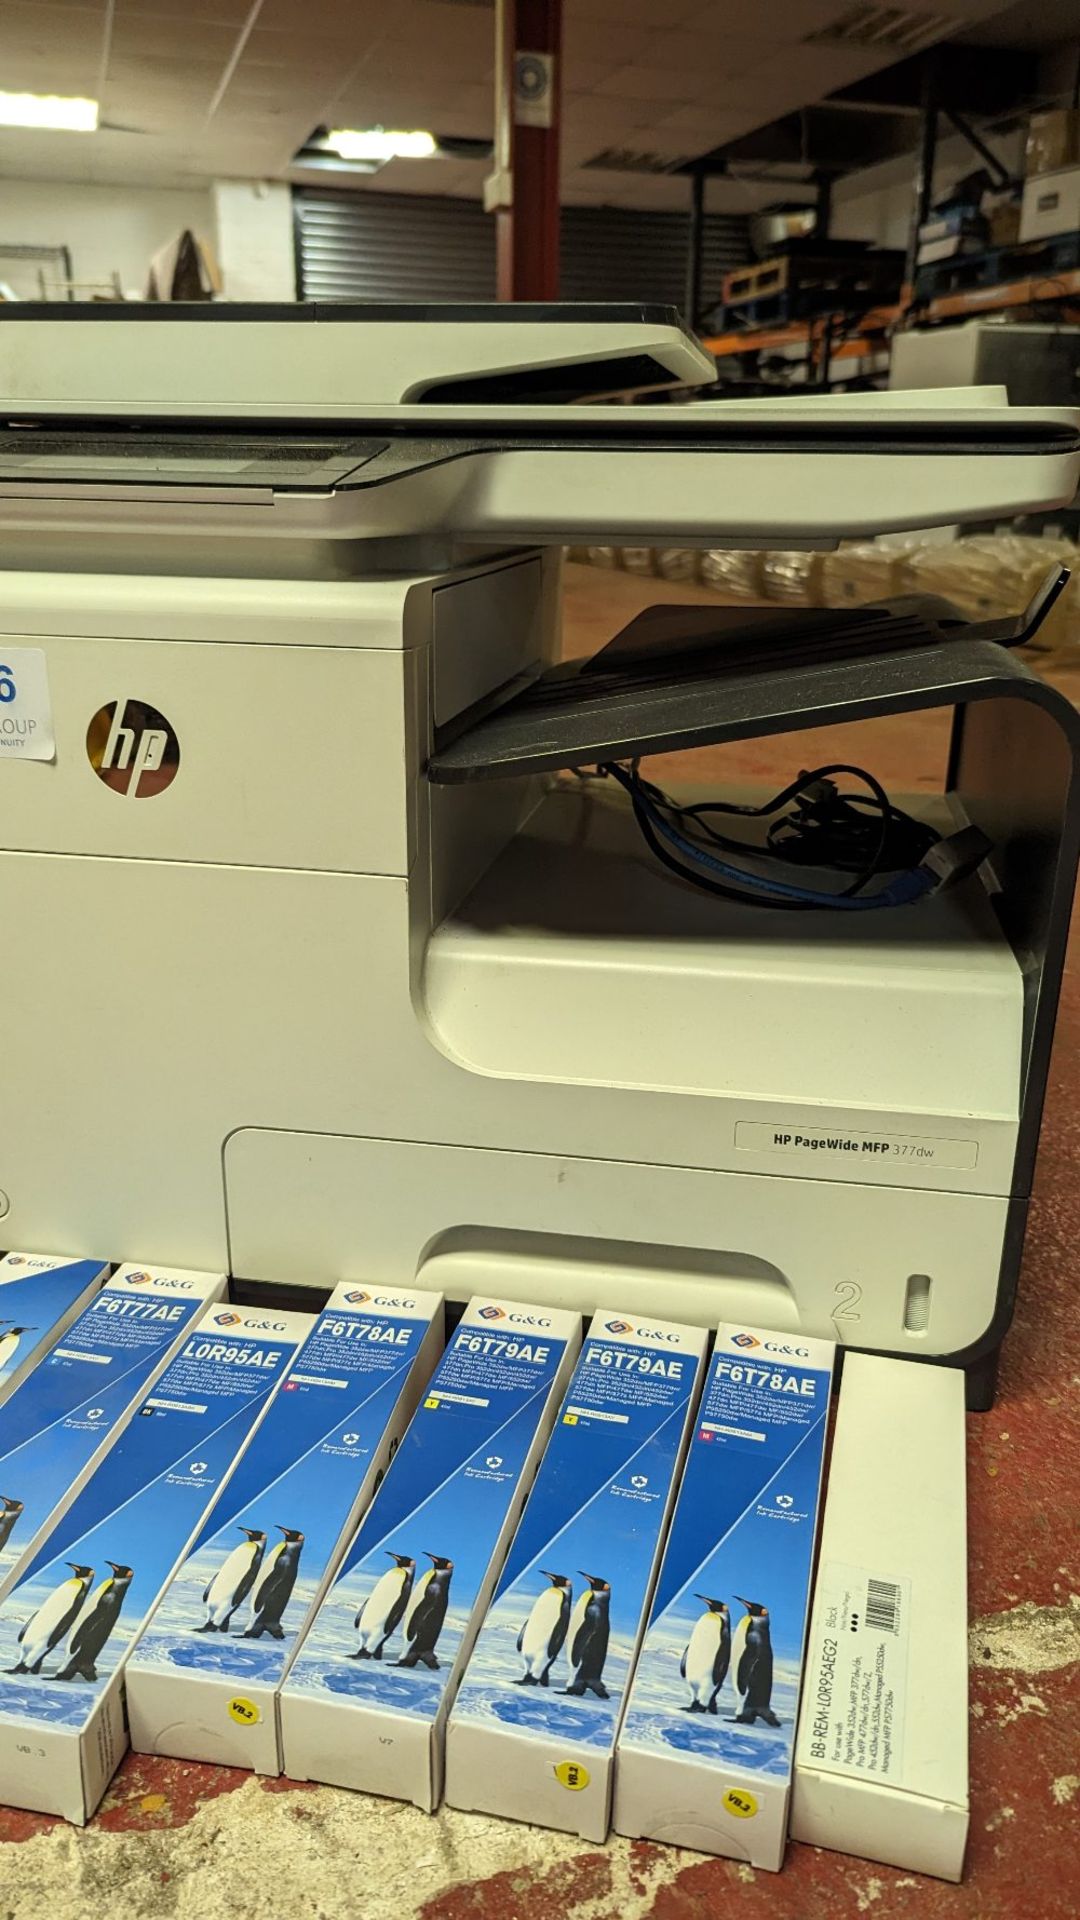 HP PageWide MFP 377dw printer - Image 2 of 4